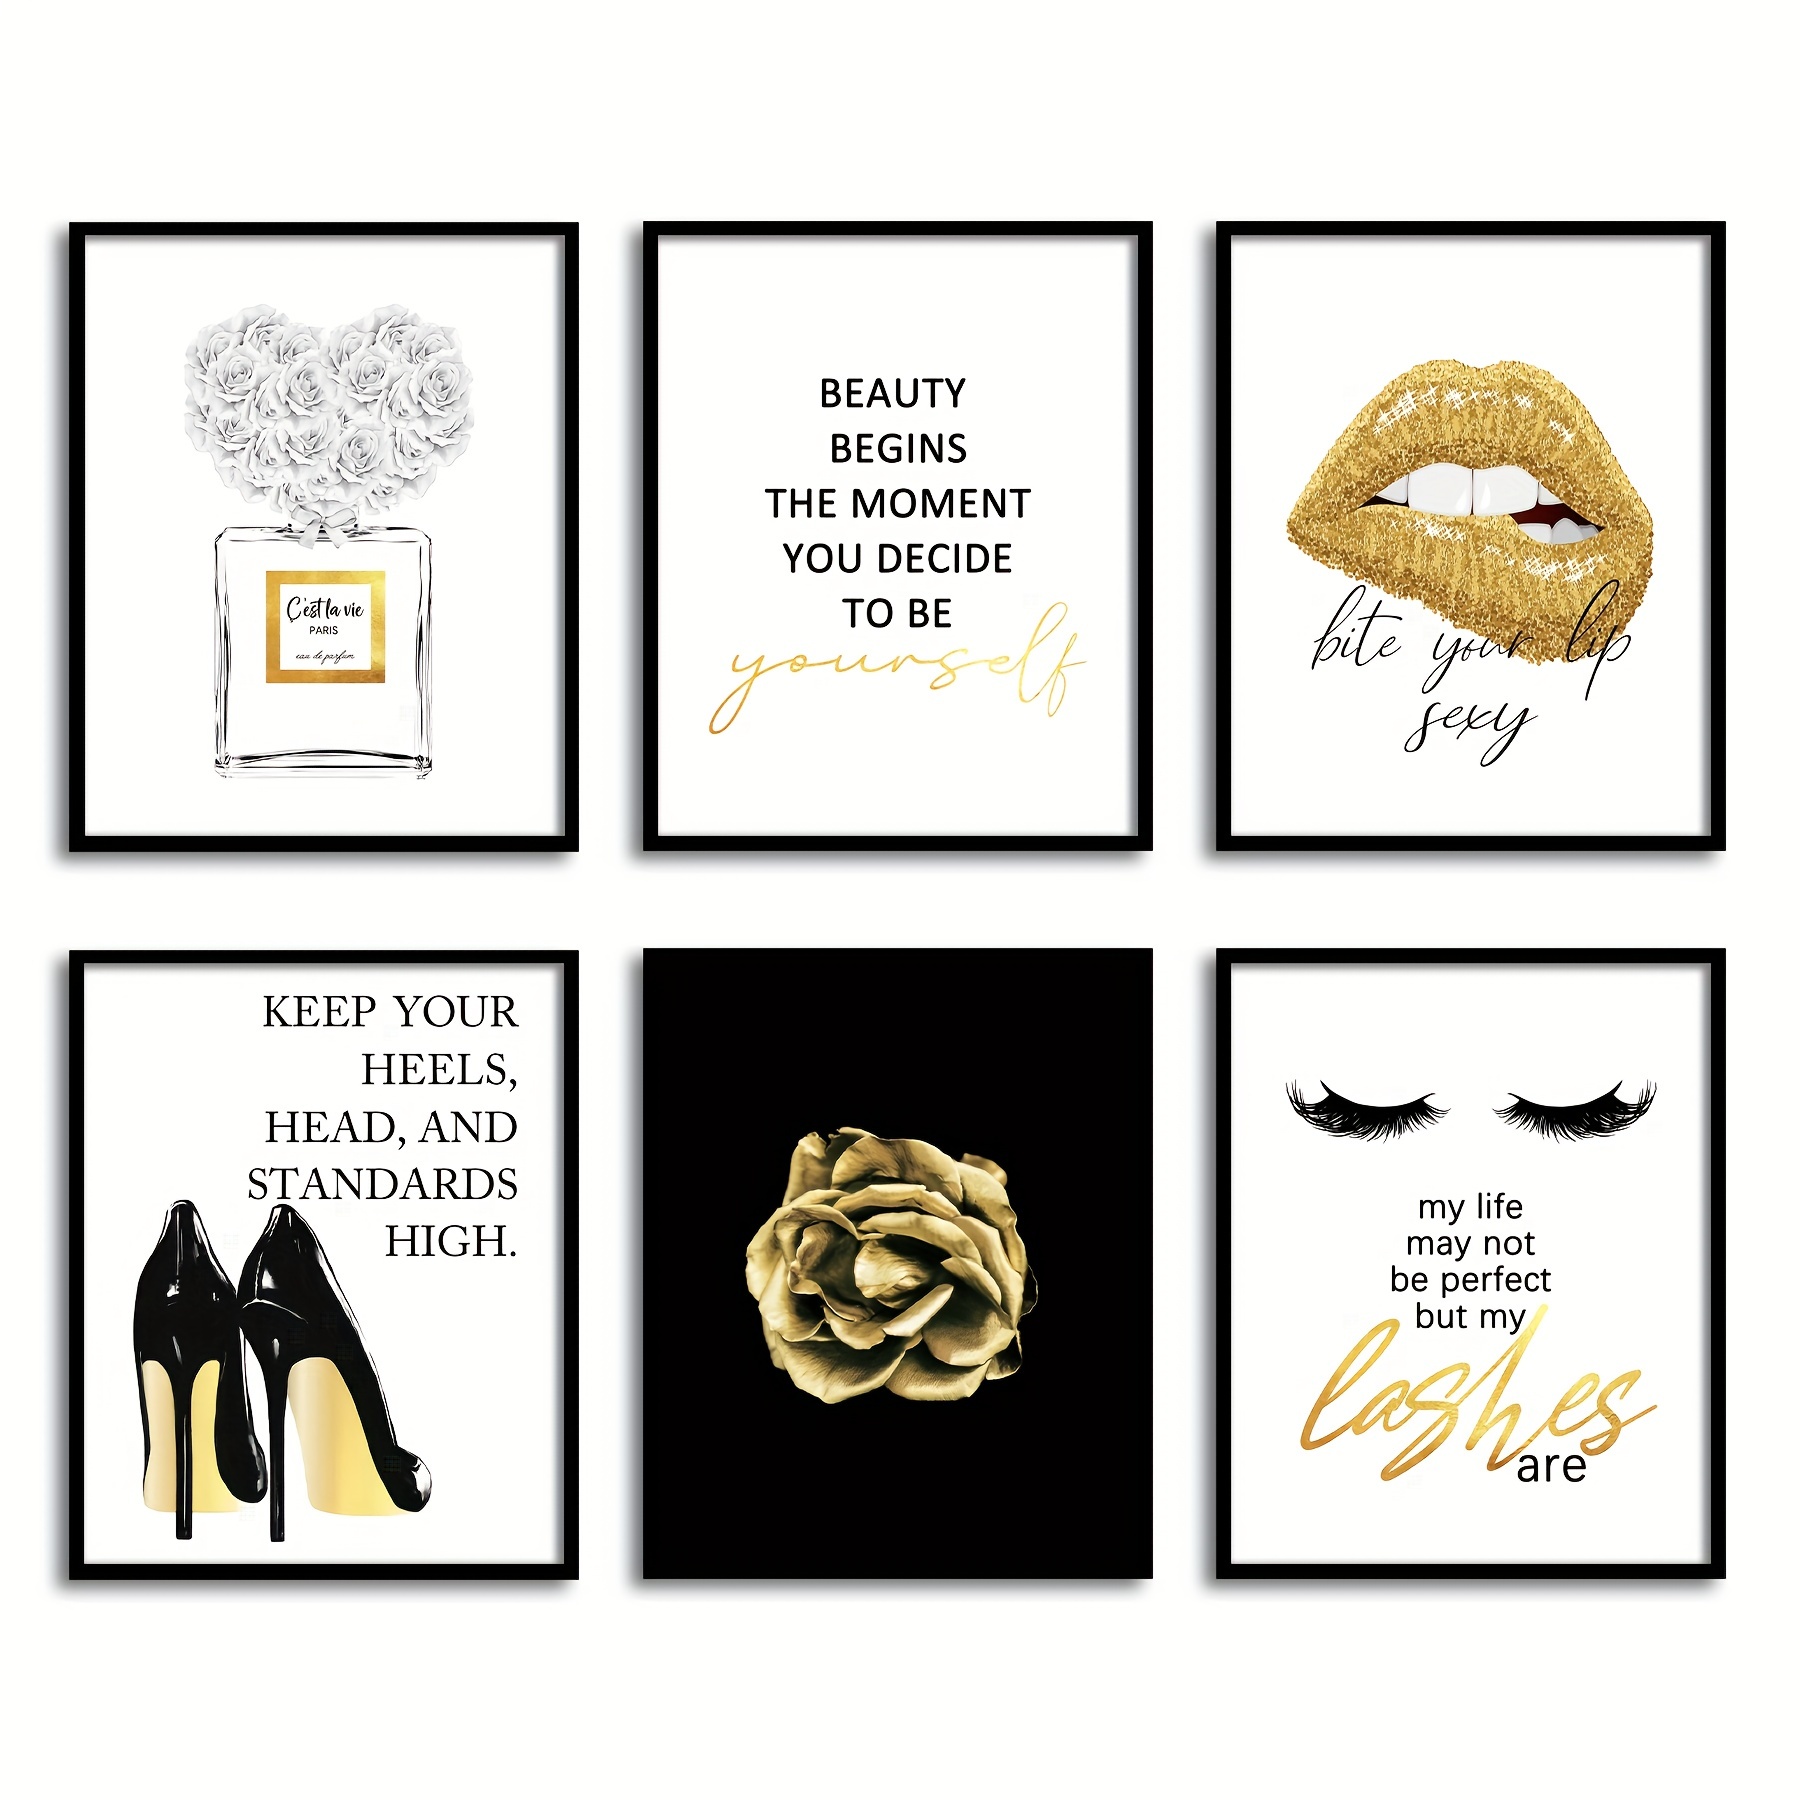 Glam Fashion Wall Art and Glam Fashion Wall Decor: The Ultimate